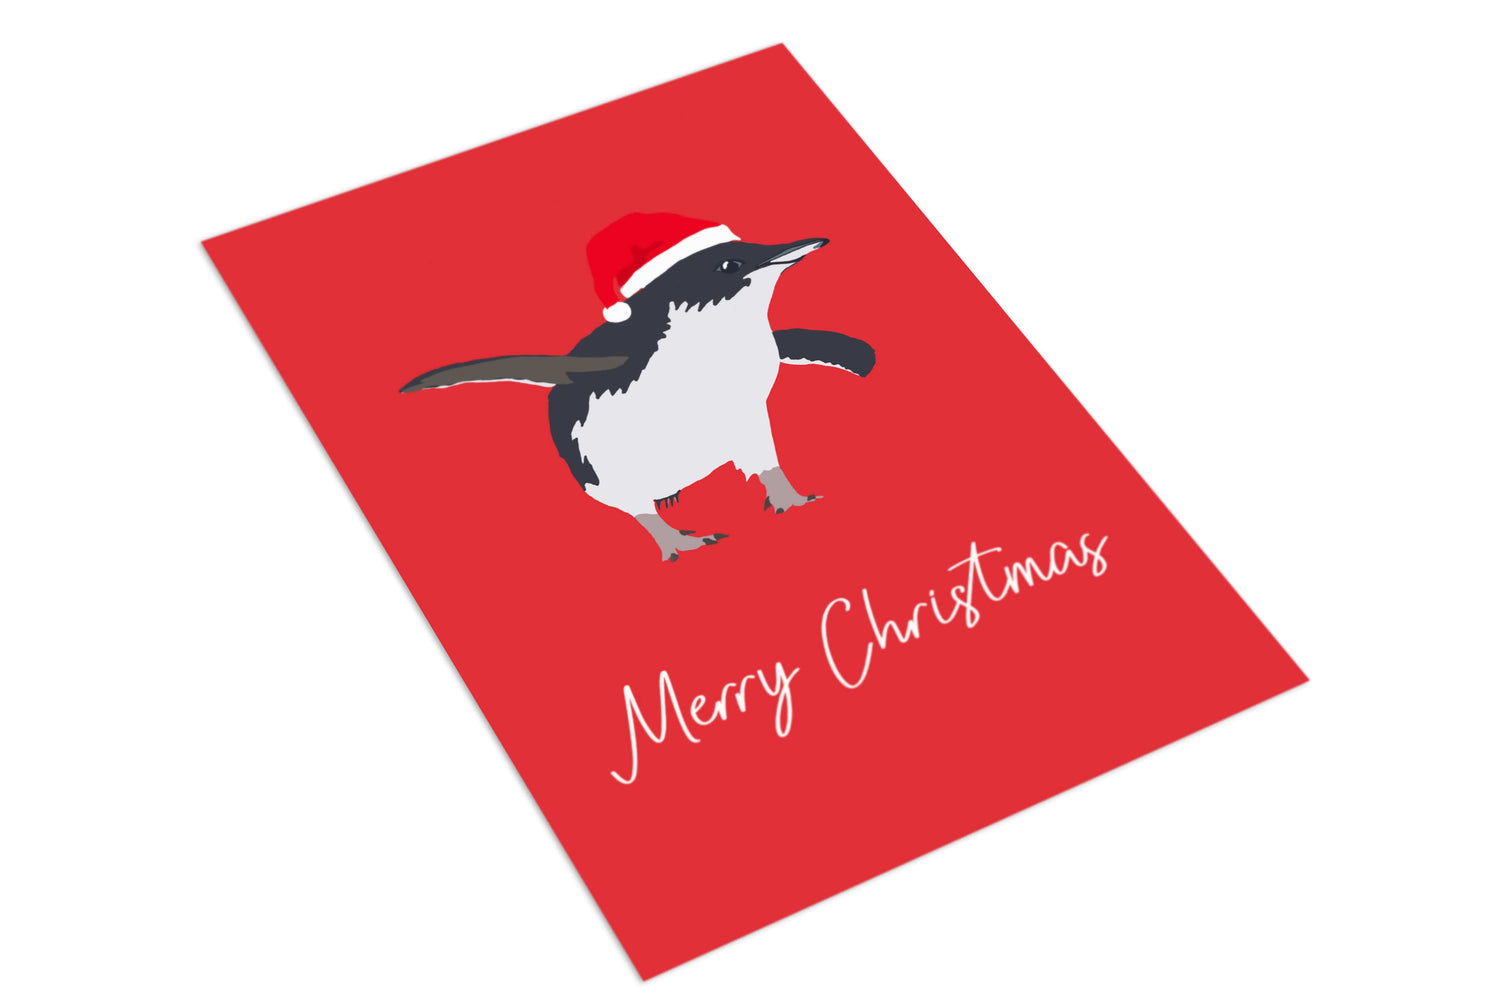 Christmas Penguin in Red - The Paper People Greeting Cards